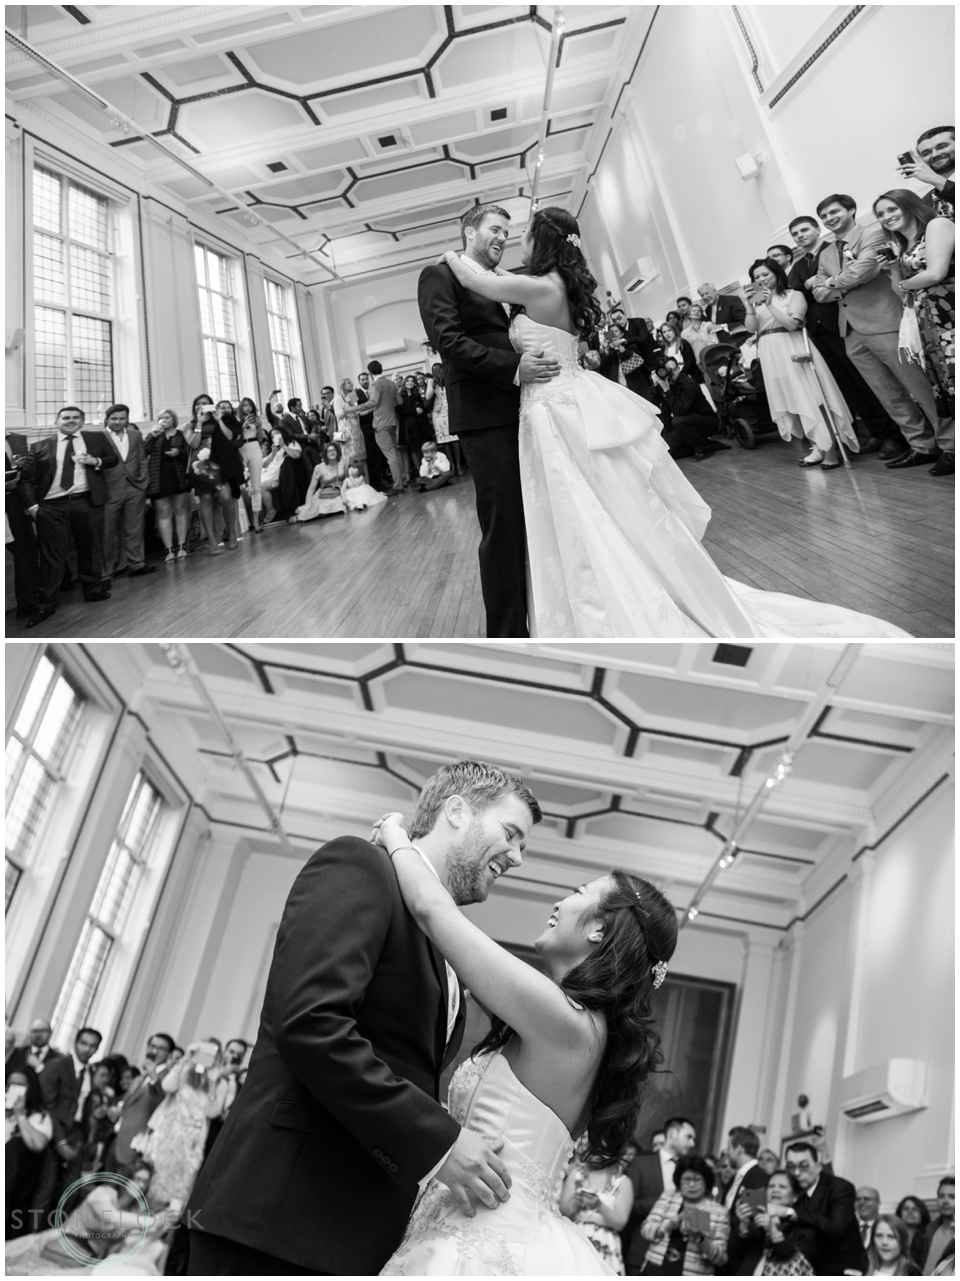 A bride and groom have their first dance at St Bride's Foundation in Fleet Street London